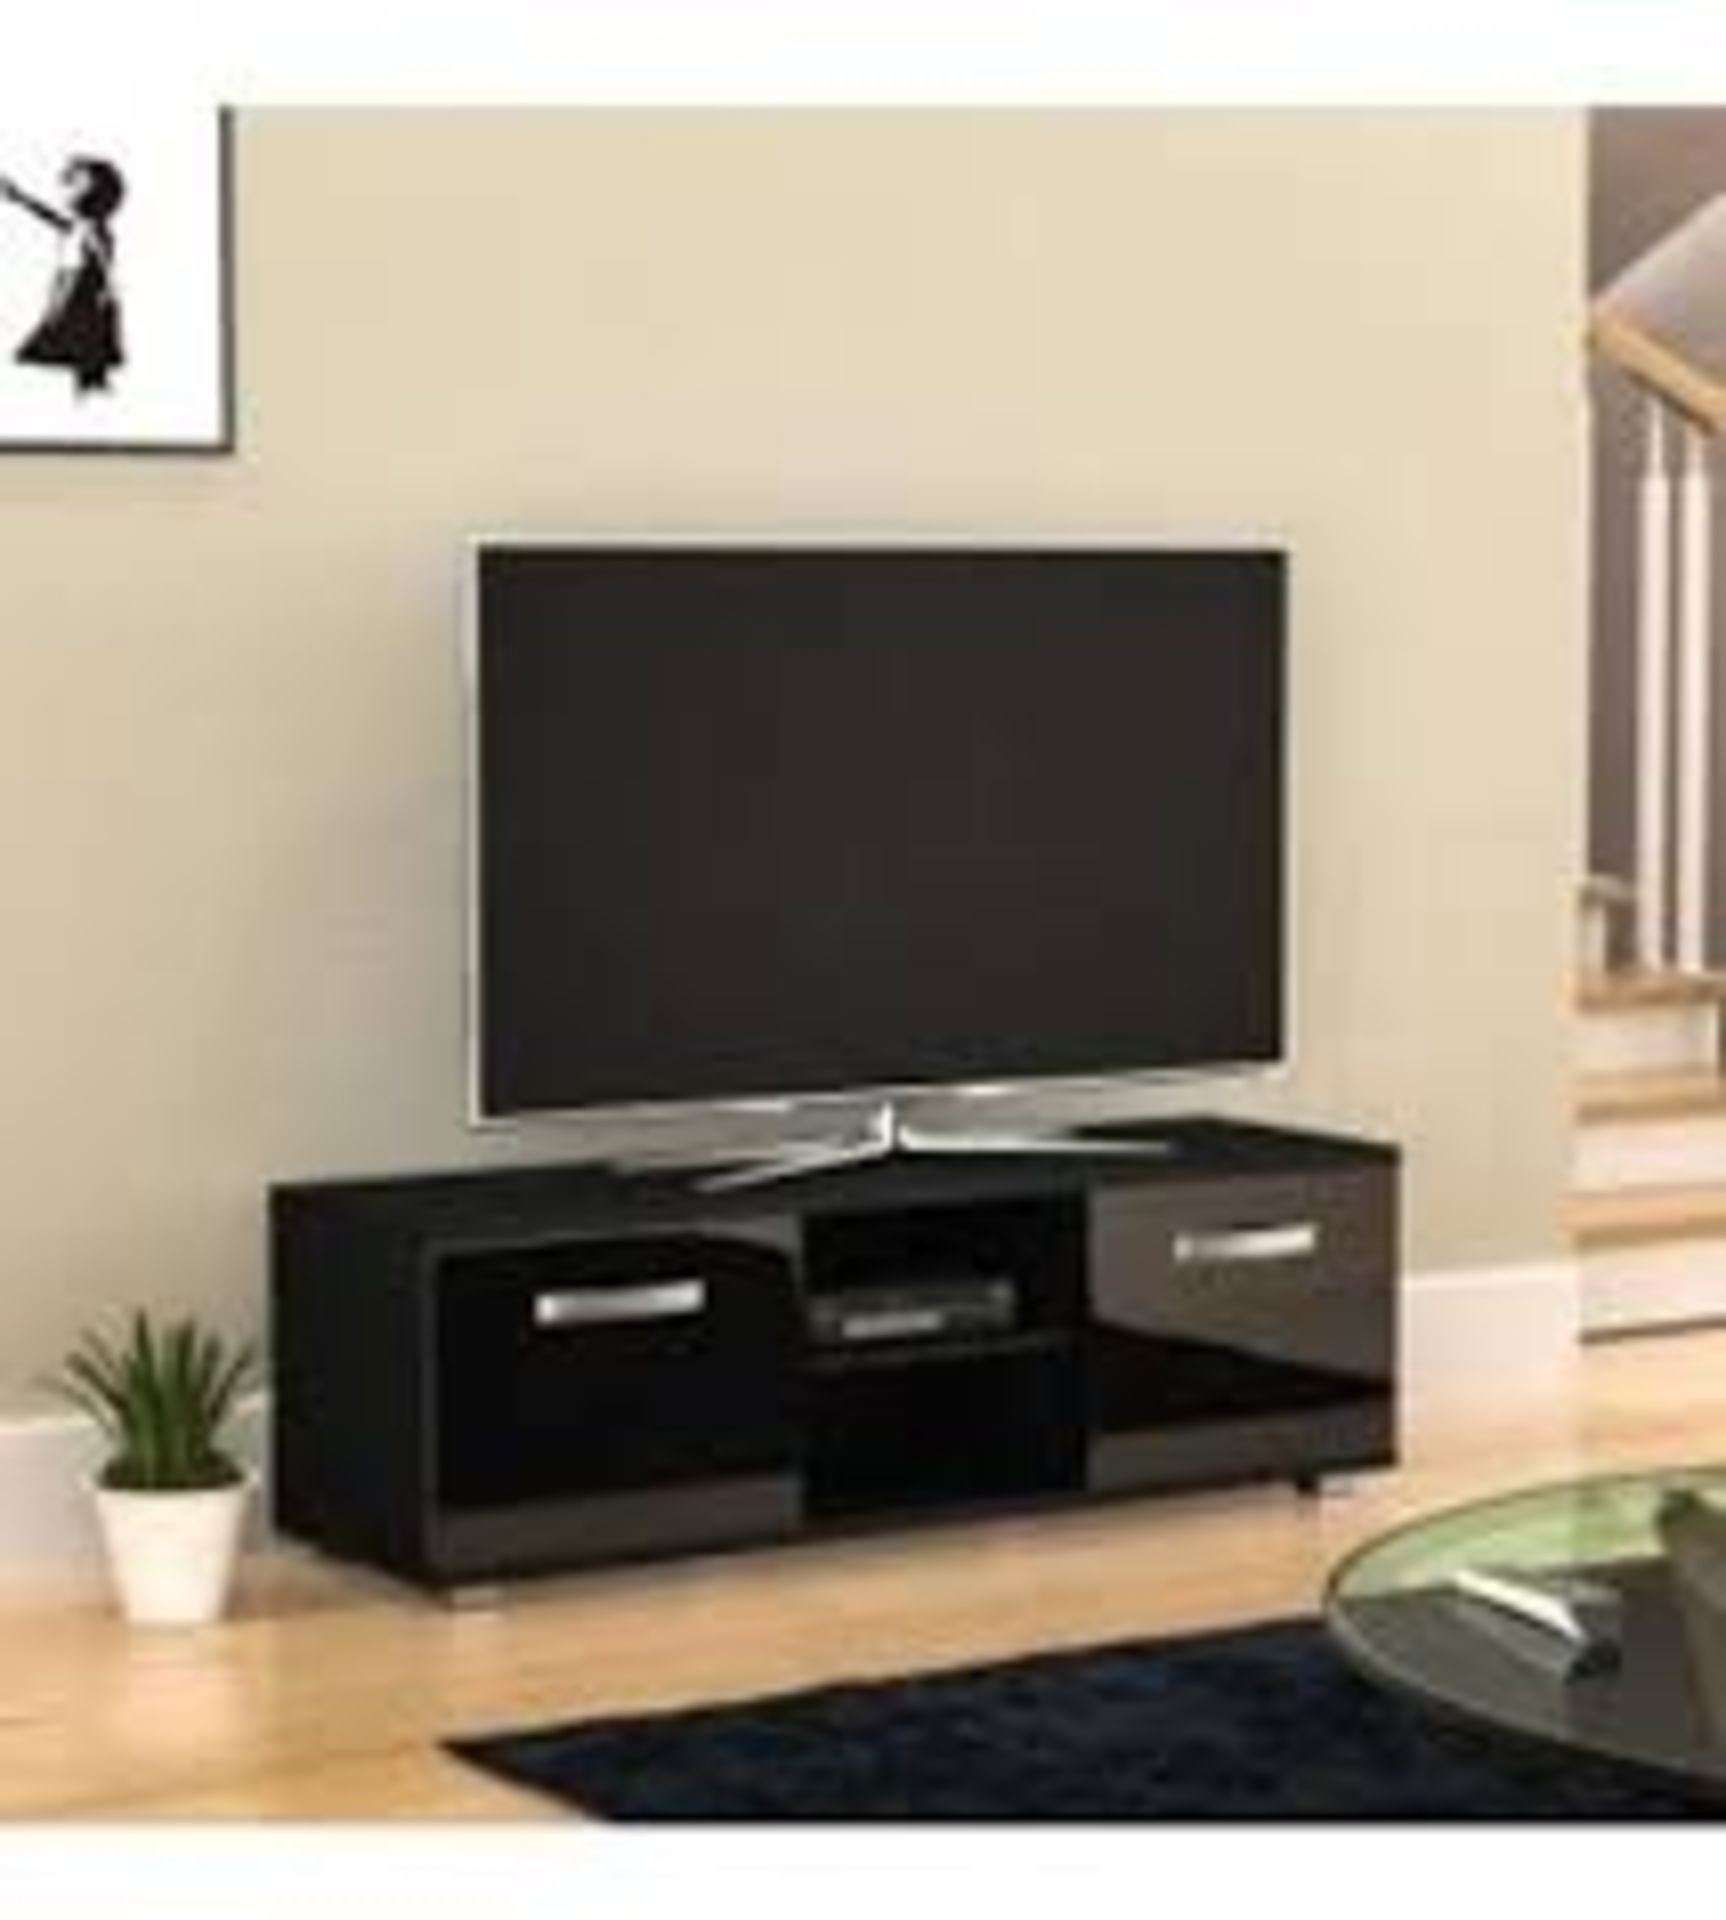 Boxed Vida Living TV Unit in Black (15748) (Public Viewing and Appraisals Available)